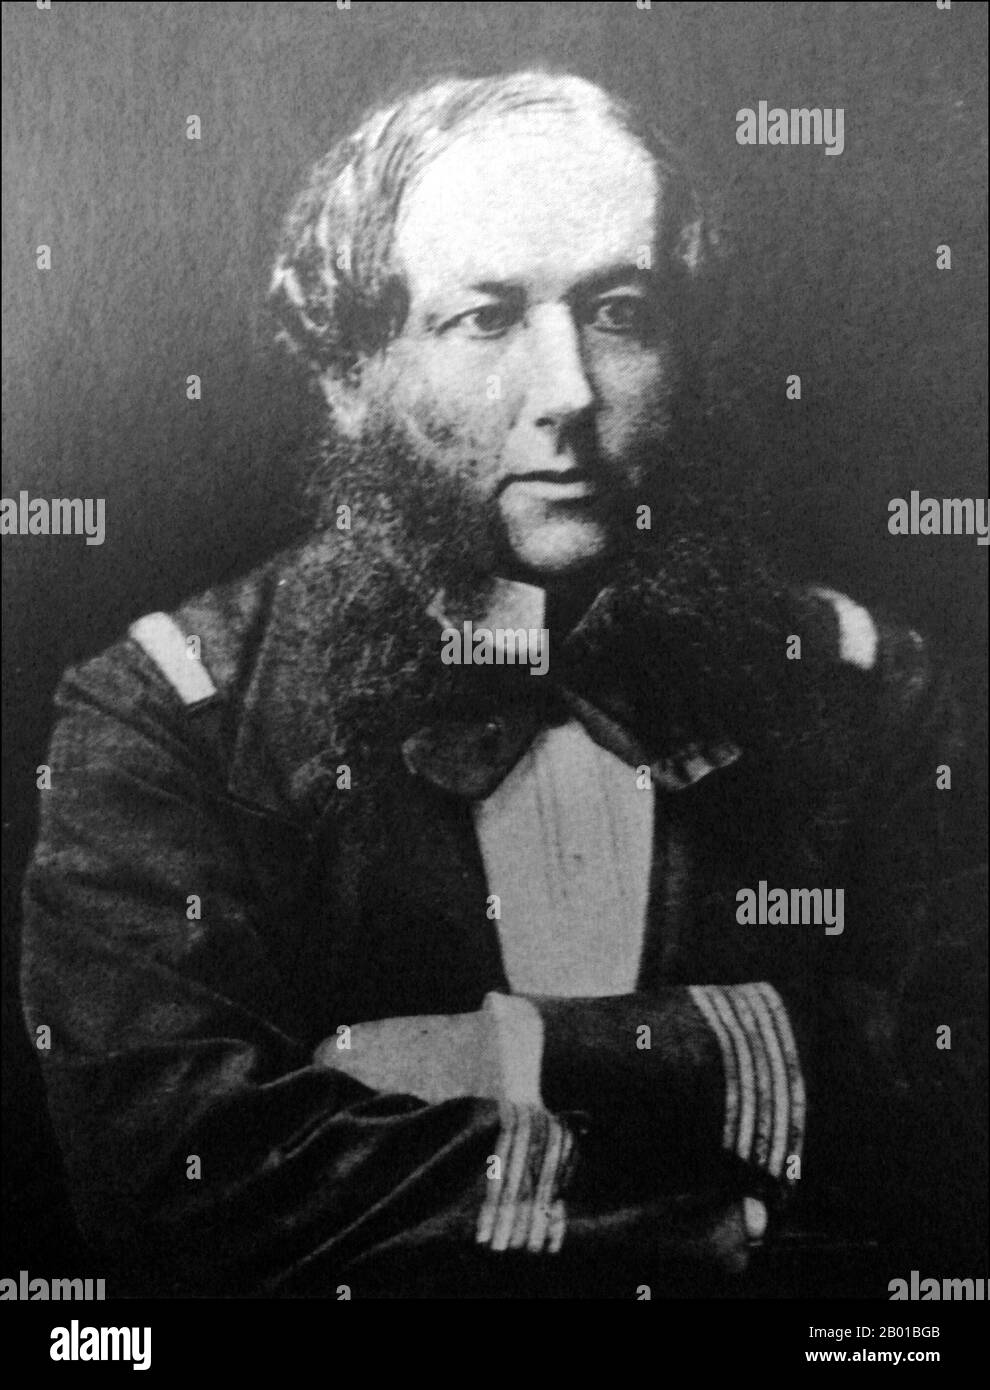 France/Vietnam: Henri Laurent Rivière (1827-1883), French naval officer, writer and imperialist. Photograph, 1870s.  Henri Laurent Rivière was a French naval officer and writer, chiefly remembered today for his role in advancing the French conquest of Tonkin (northern Vietnam) in the 1880s. Rivière's seizure of the citadel of Hanoi in April 1882 inaugurated a period of undeclared hostilities between France and China that culminated two years later in the Sino-French War (1884-1885). Stock Photo